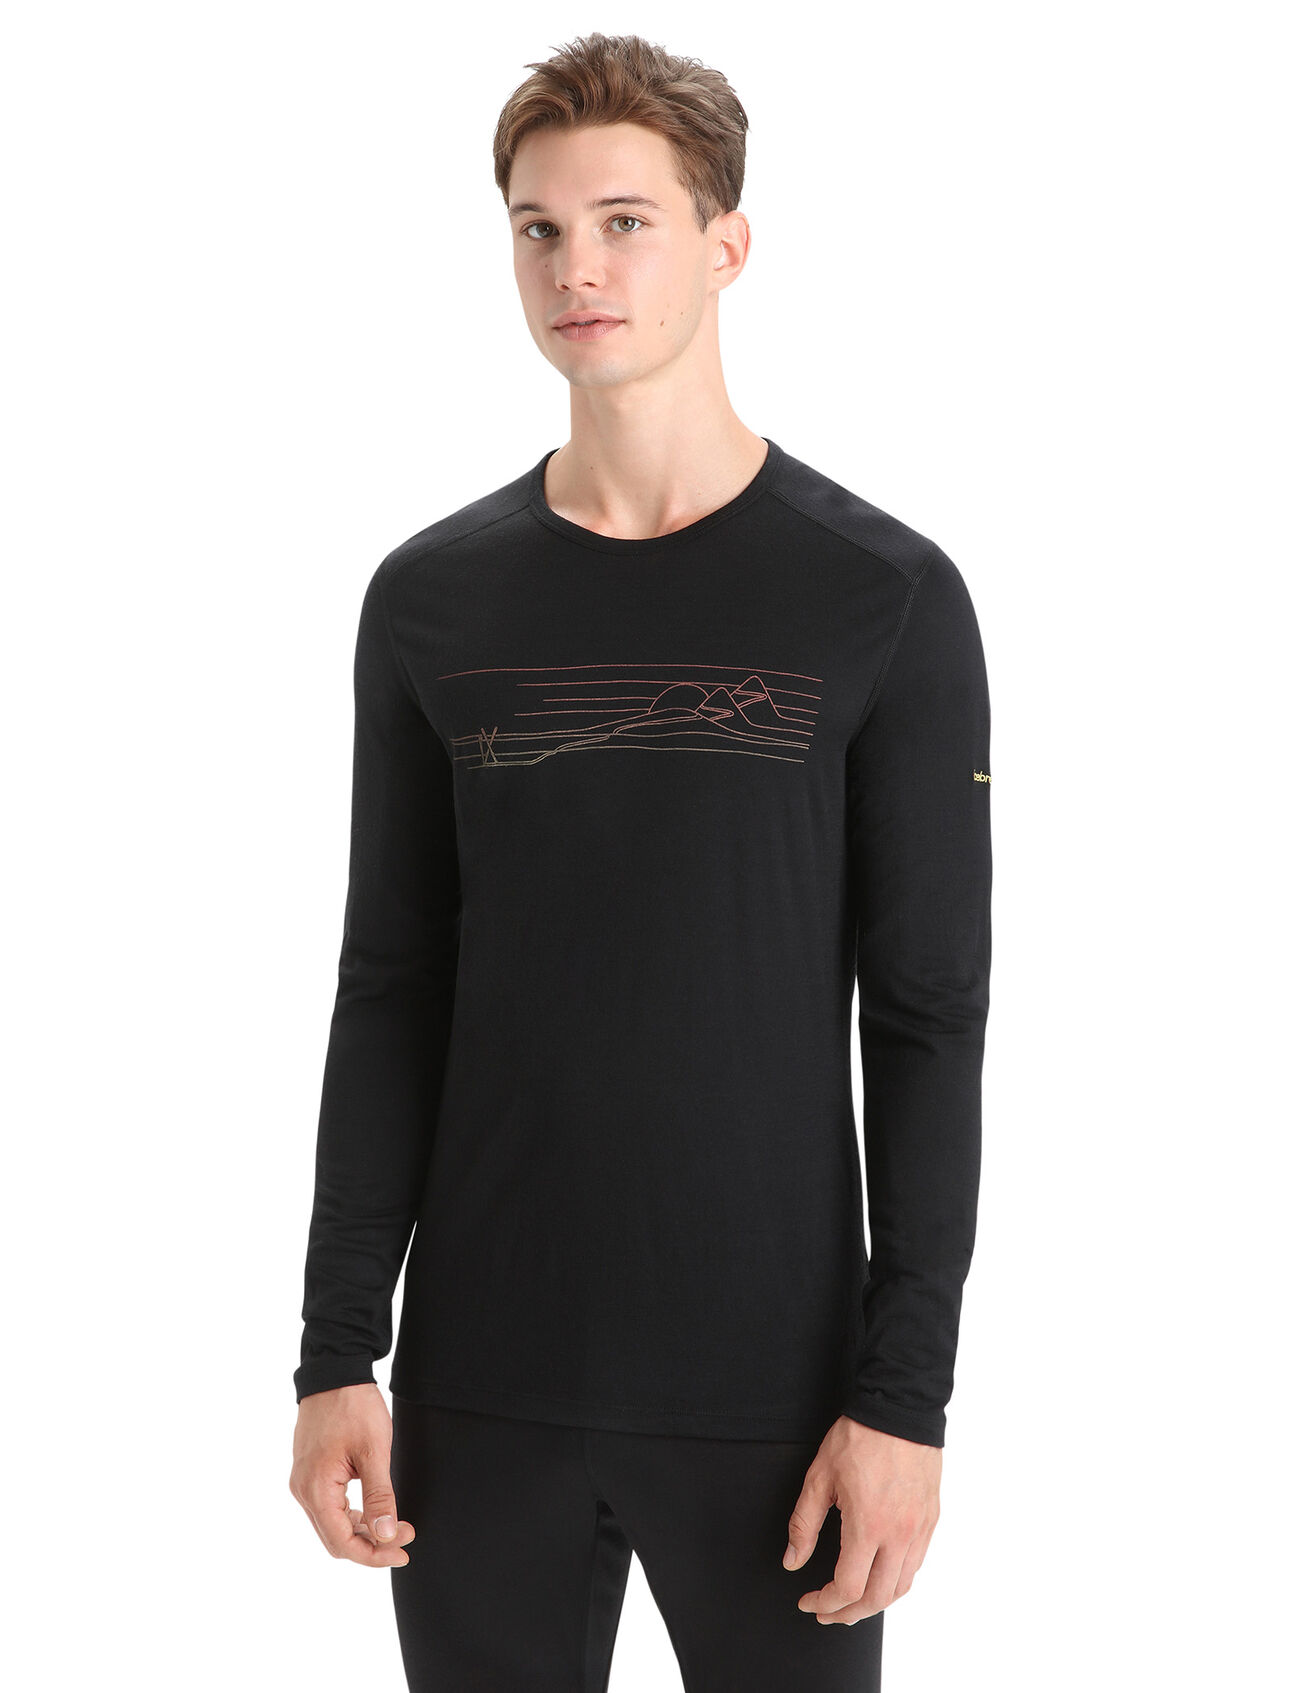 Mens Merino 200 Oasis Long Sleeve Crew Neck Thermal Top Ski Stripes The benchmark against which all others are judged, the 200 Oasis Long Sleeve Crewe Ski Stripes features our most versatile merino jersey fabric for year-round layering performance across any activity, with a hand-drawn sketch by Damon Watters.